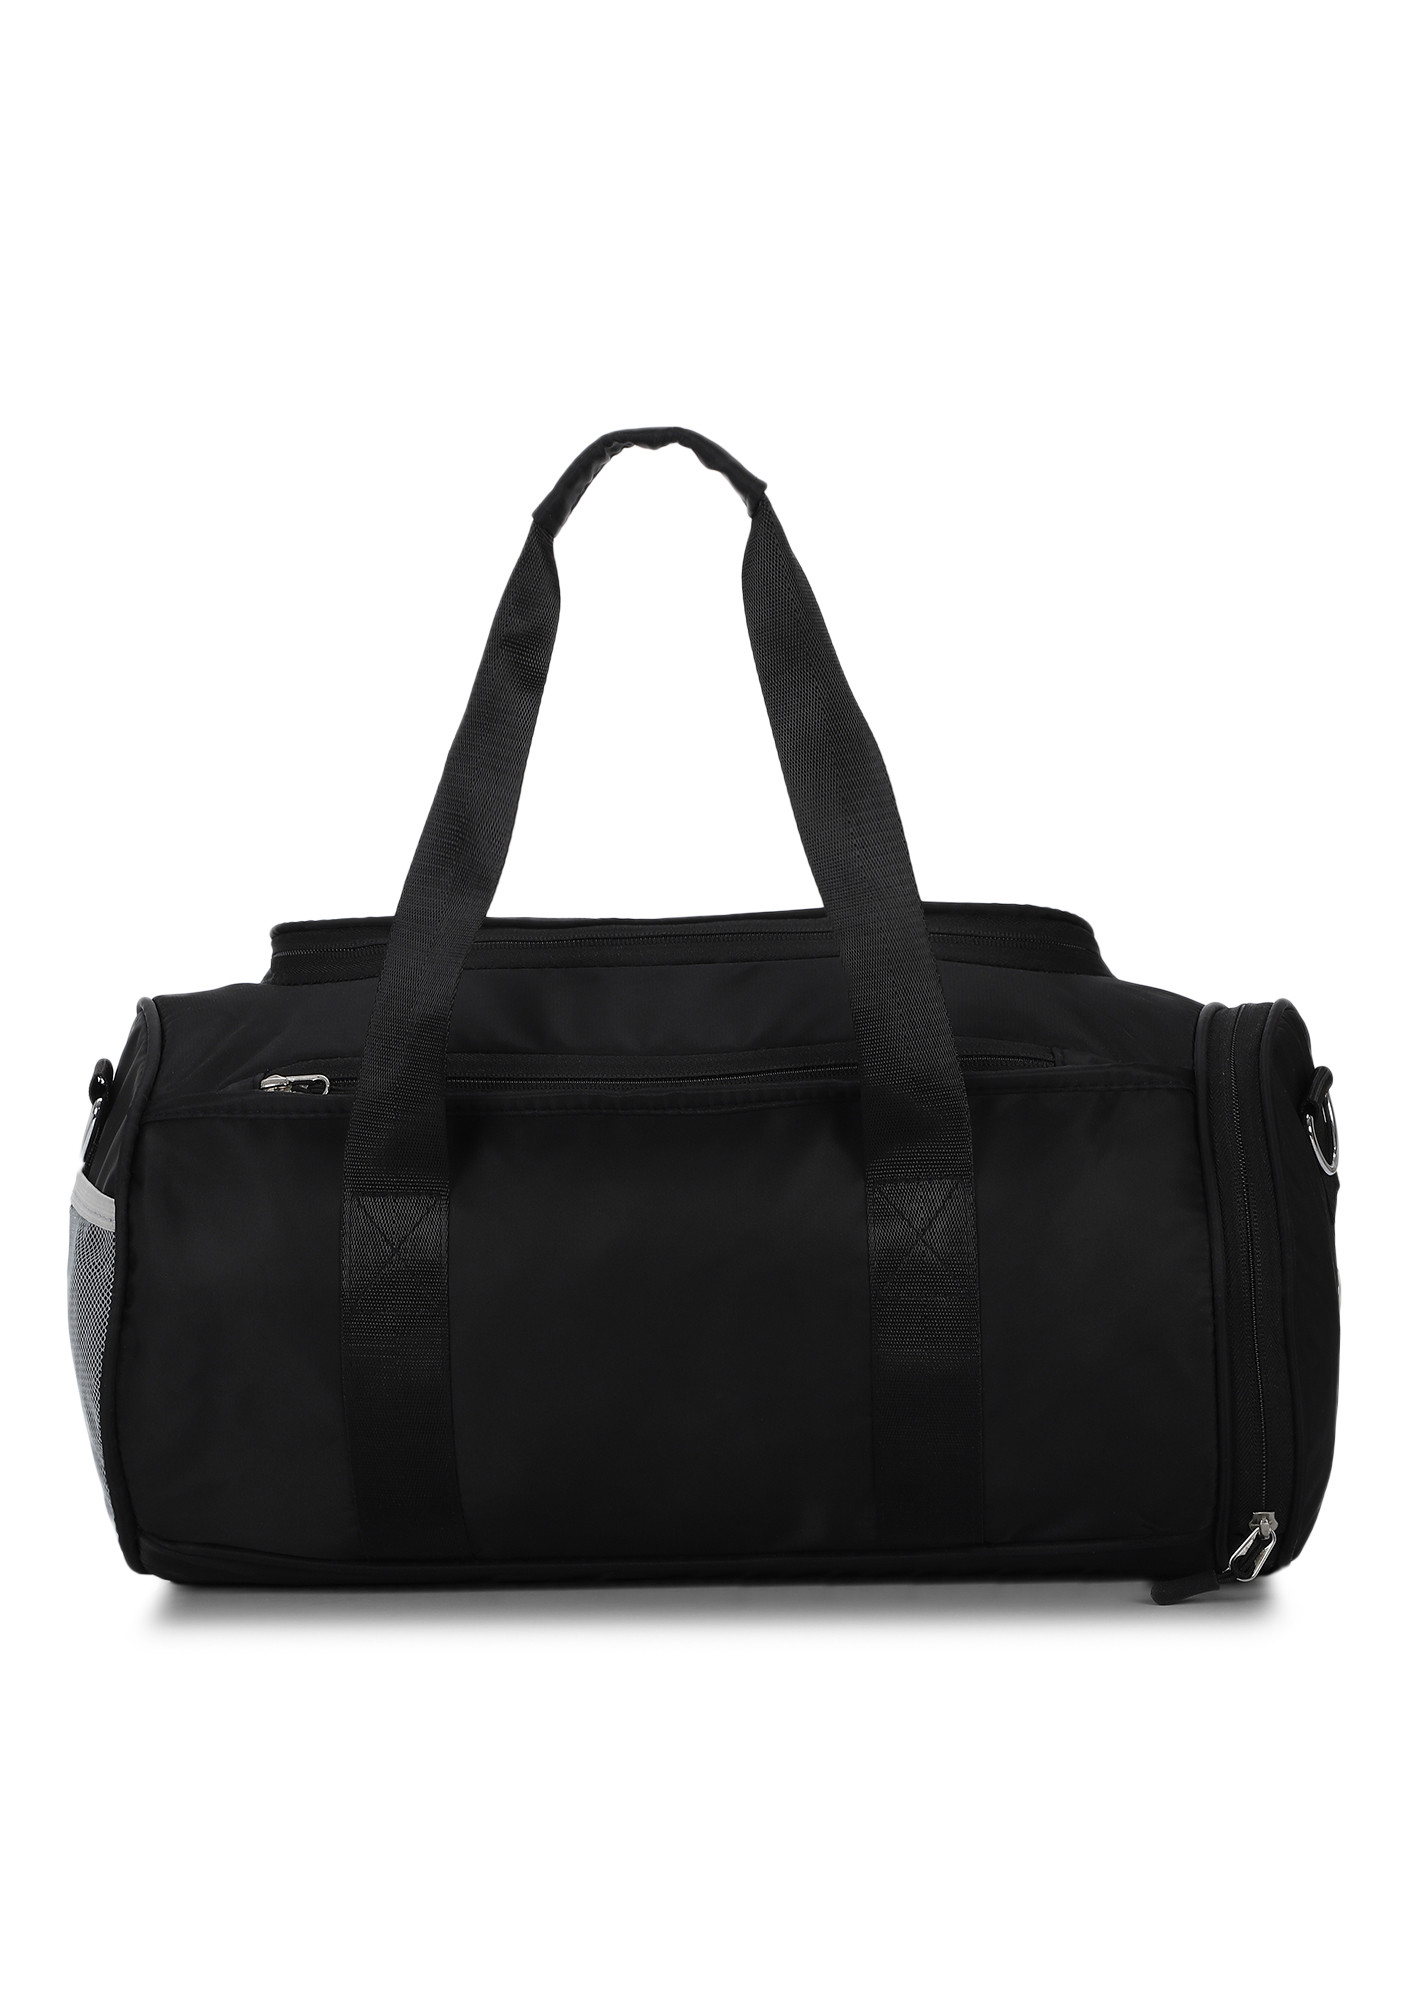 ALL SET FOR WORK-OUTS BLACK DUFFLE BAG